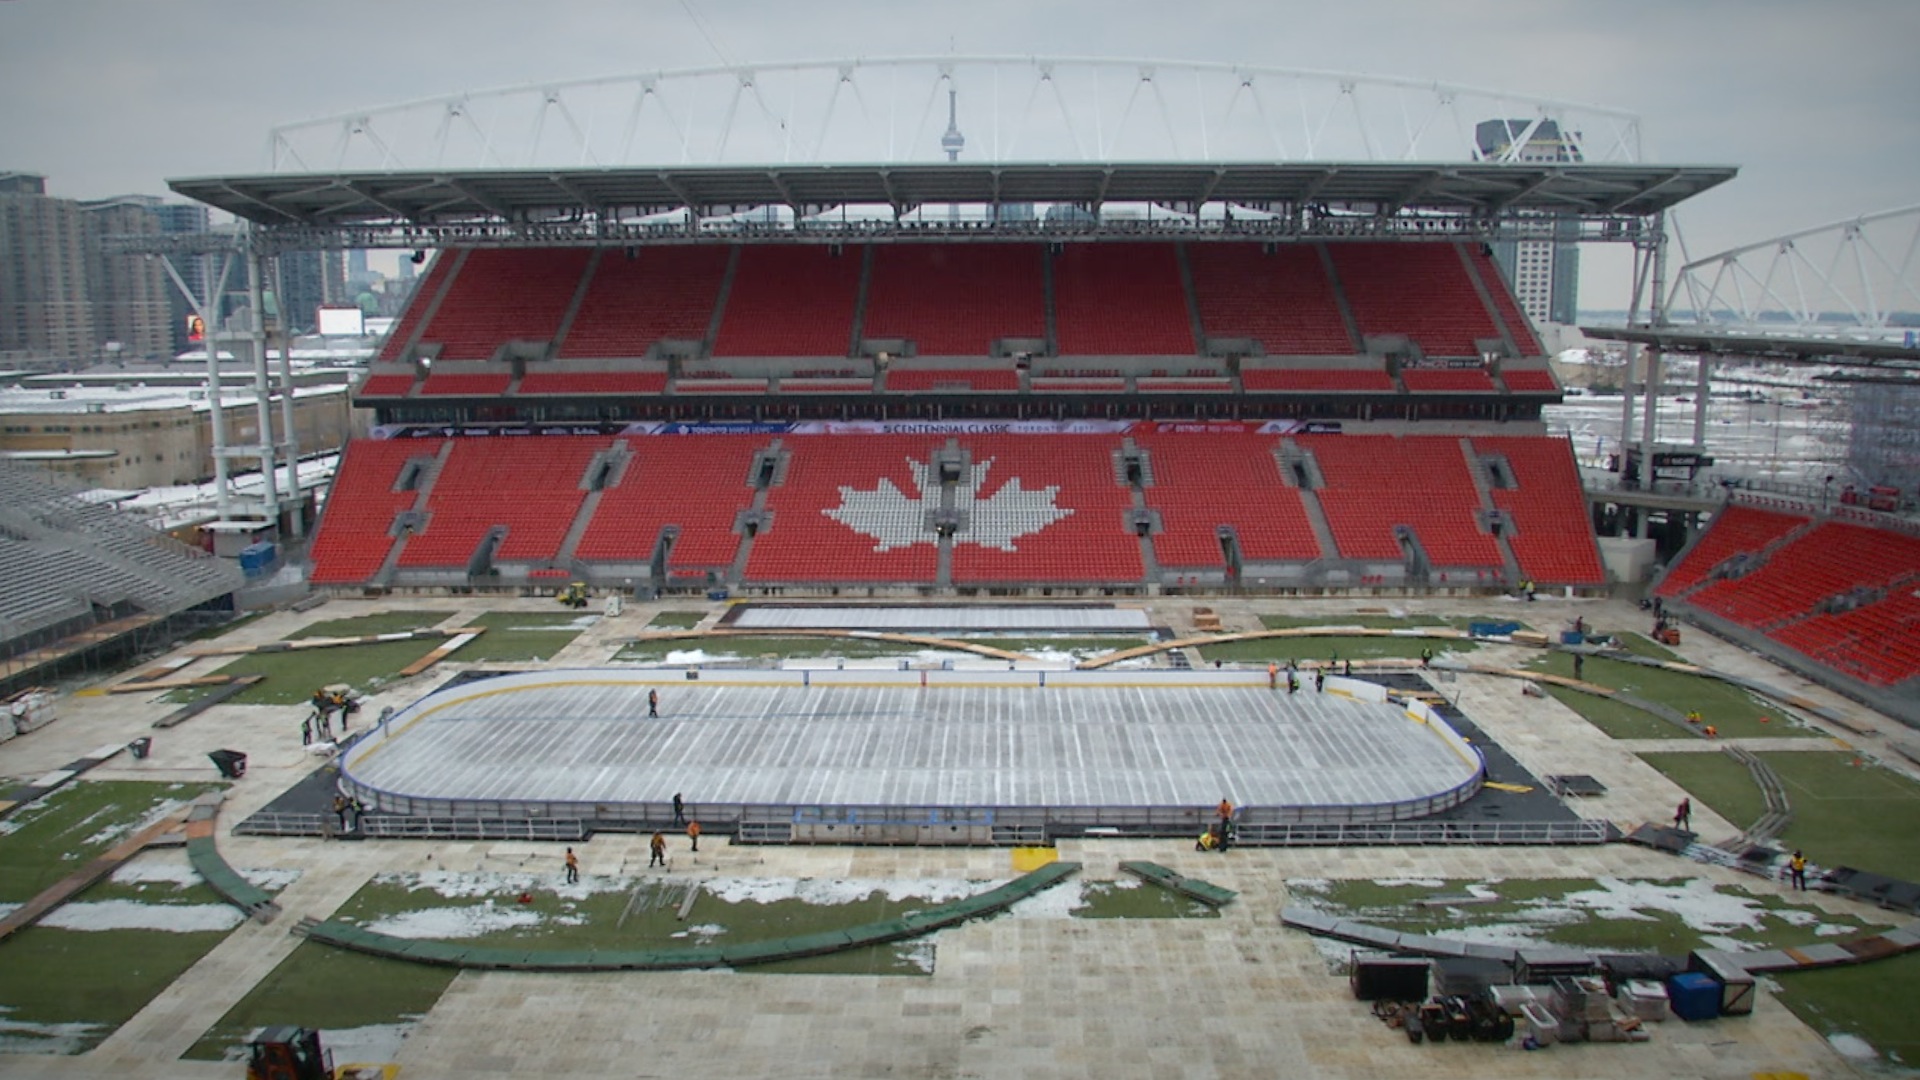 Toronto Maple Leafs arrive on Centennial Classic stage - Sports Illustrated